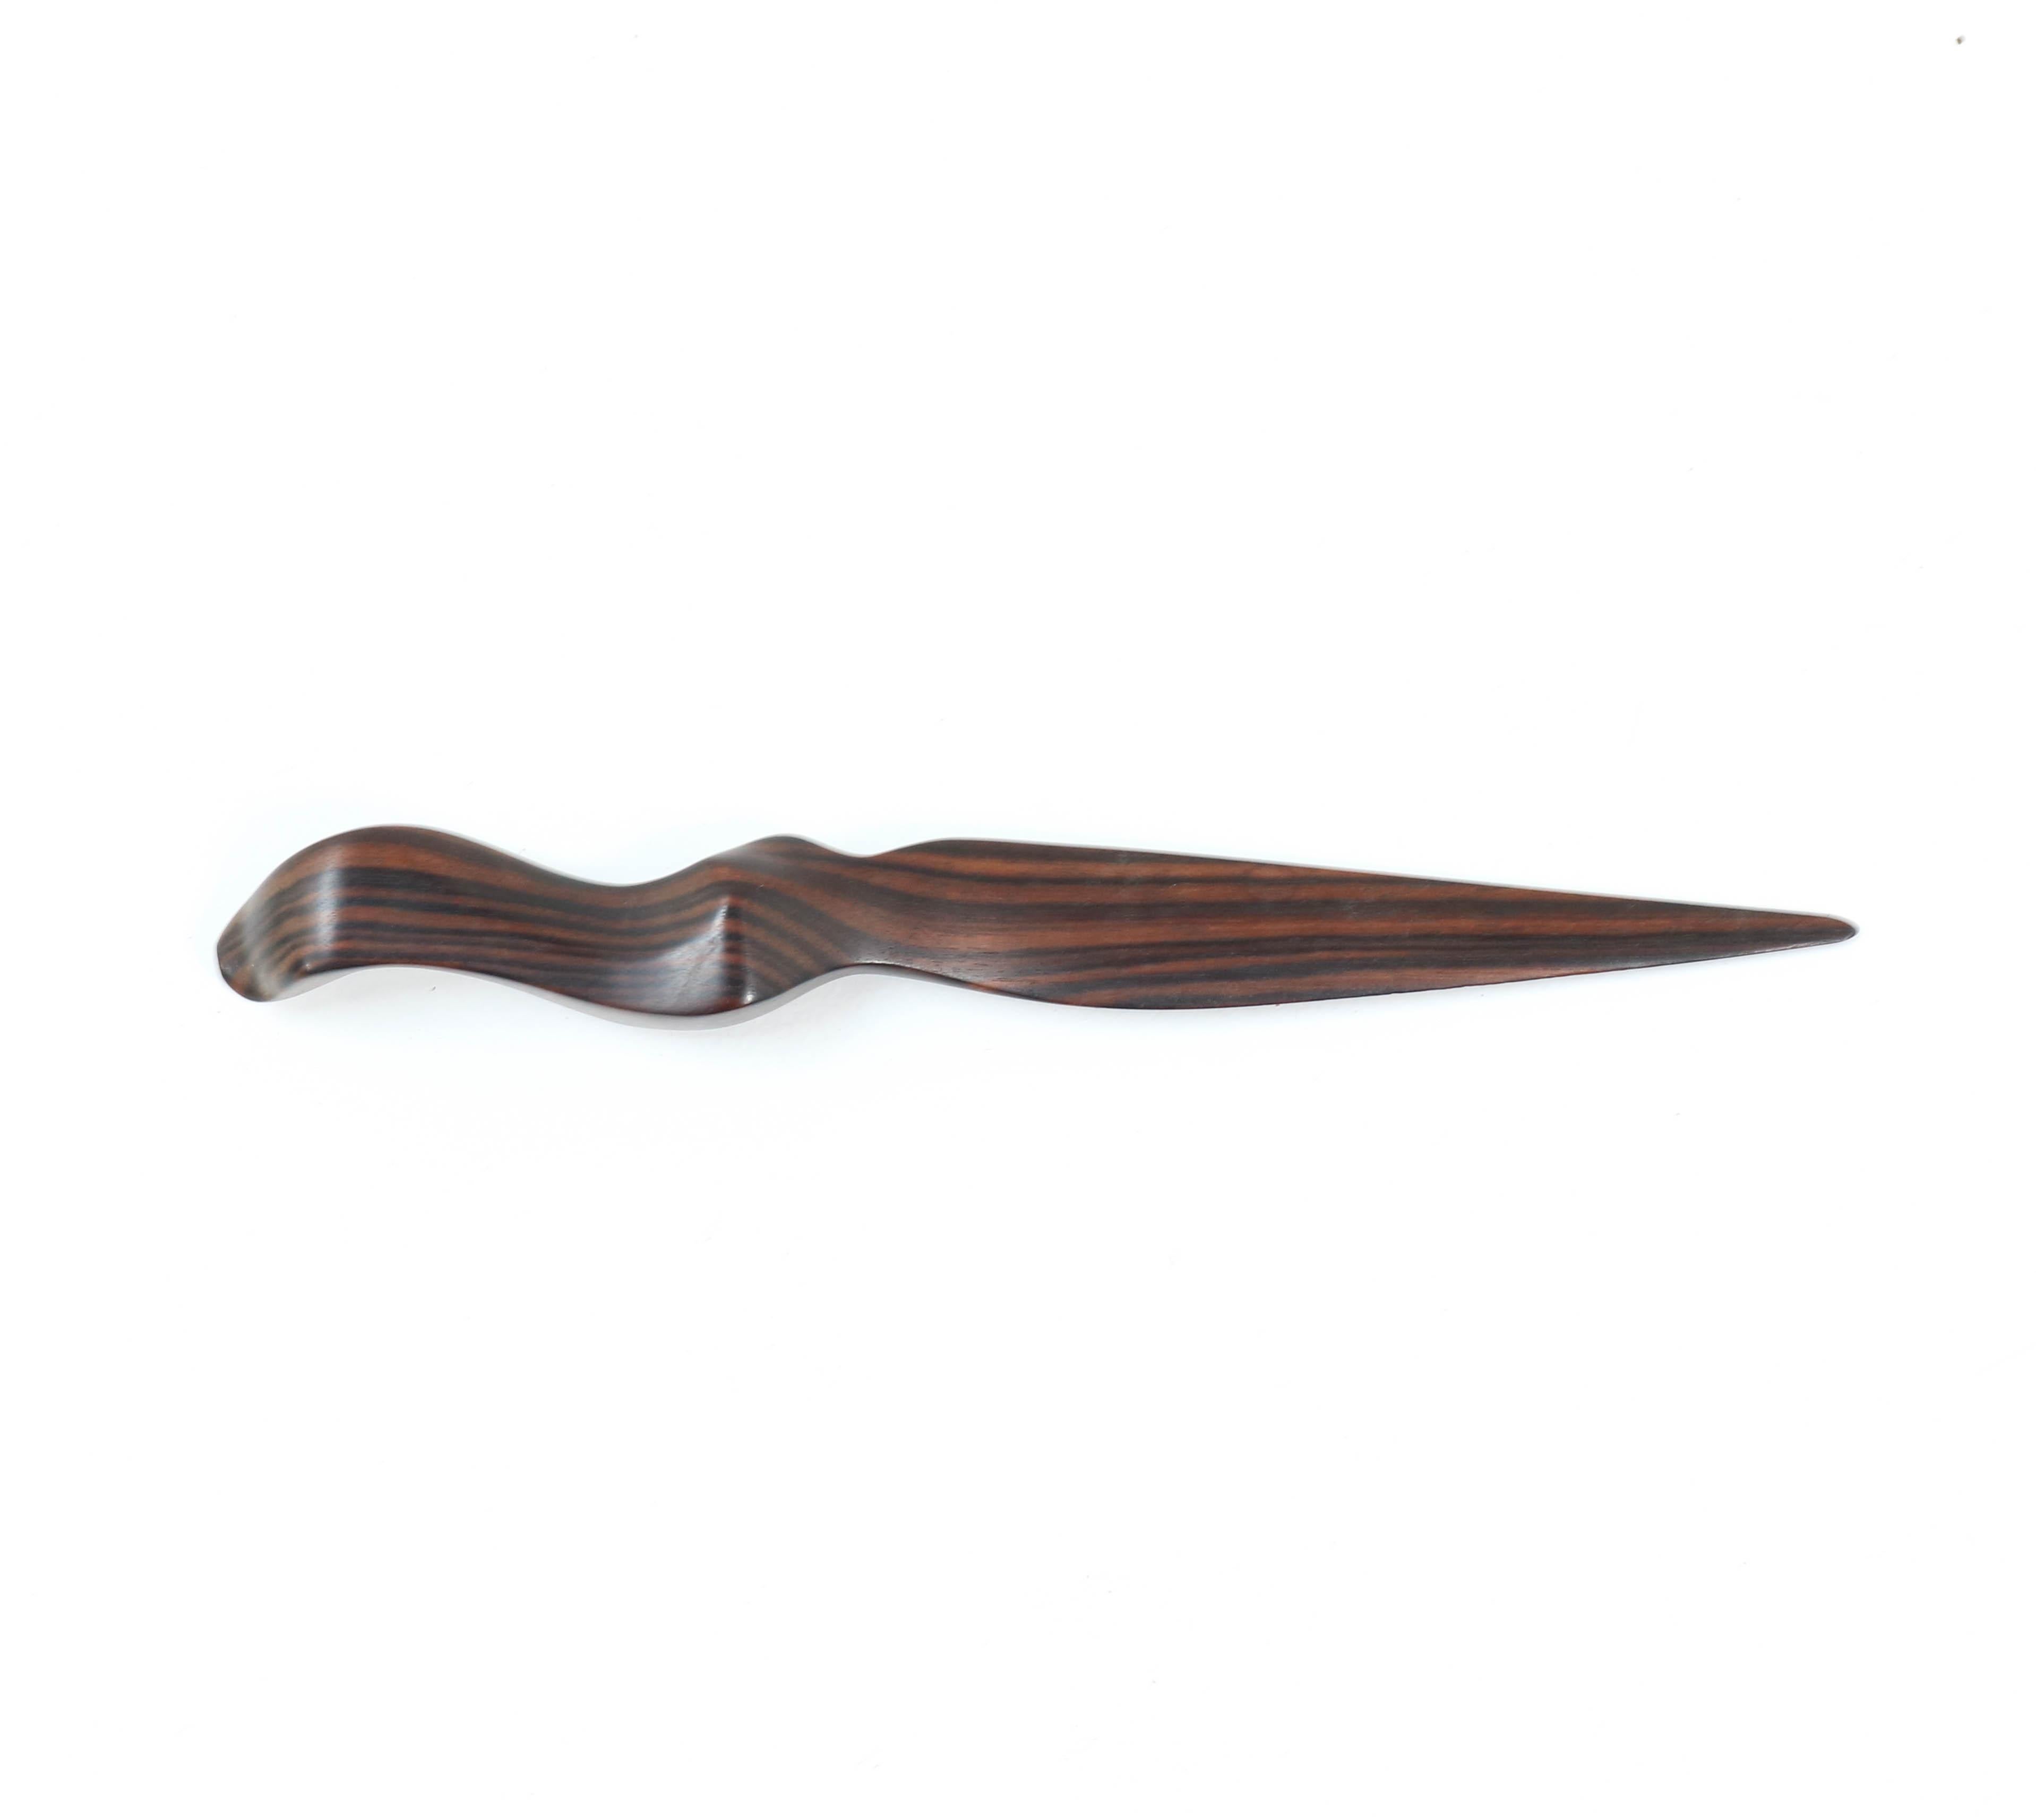 Wonderful and rare Art Deco Amsterdamse School letter opener.
Striking Dutch design from the 1920s.
Solid macassar ebony and the handle is a stylish shaped otter.
In very good original condition with a beautiful patina.